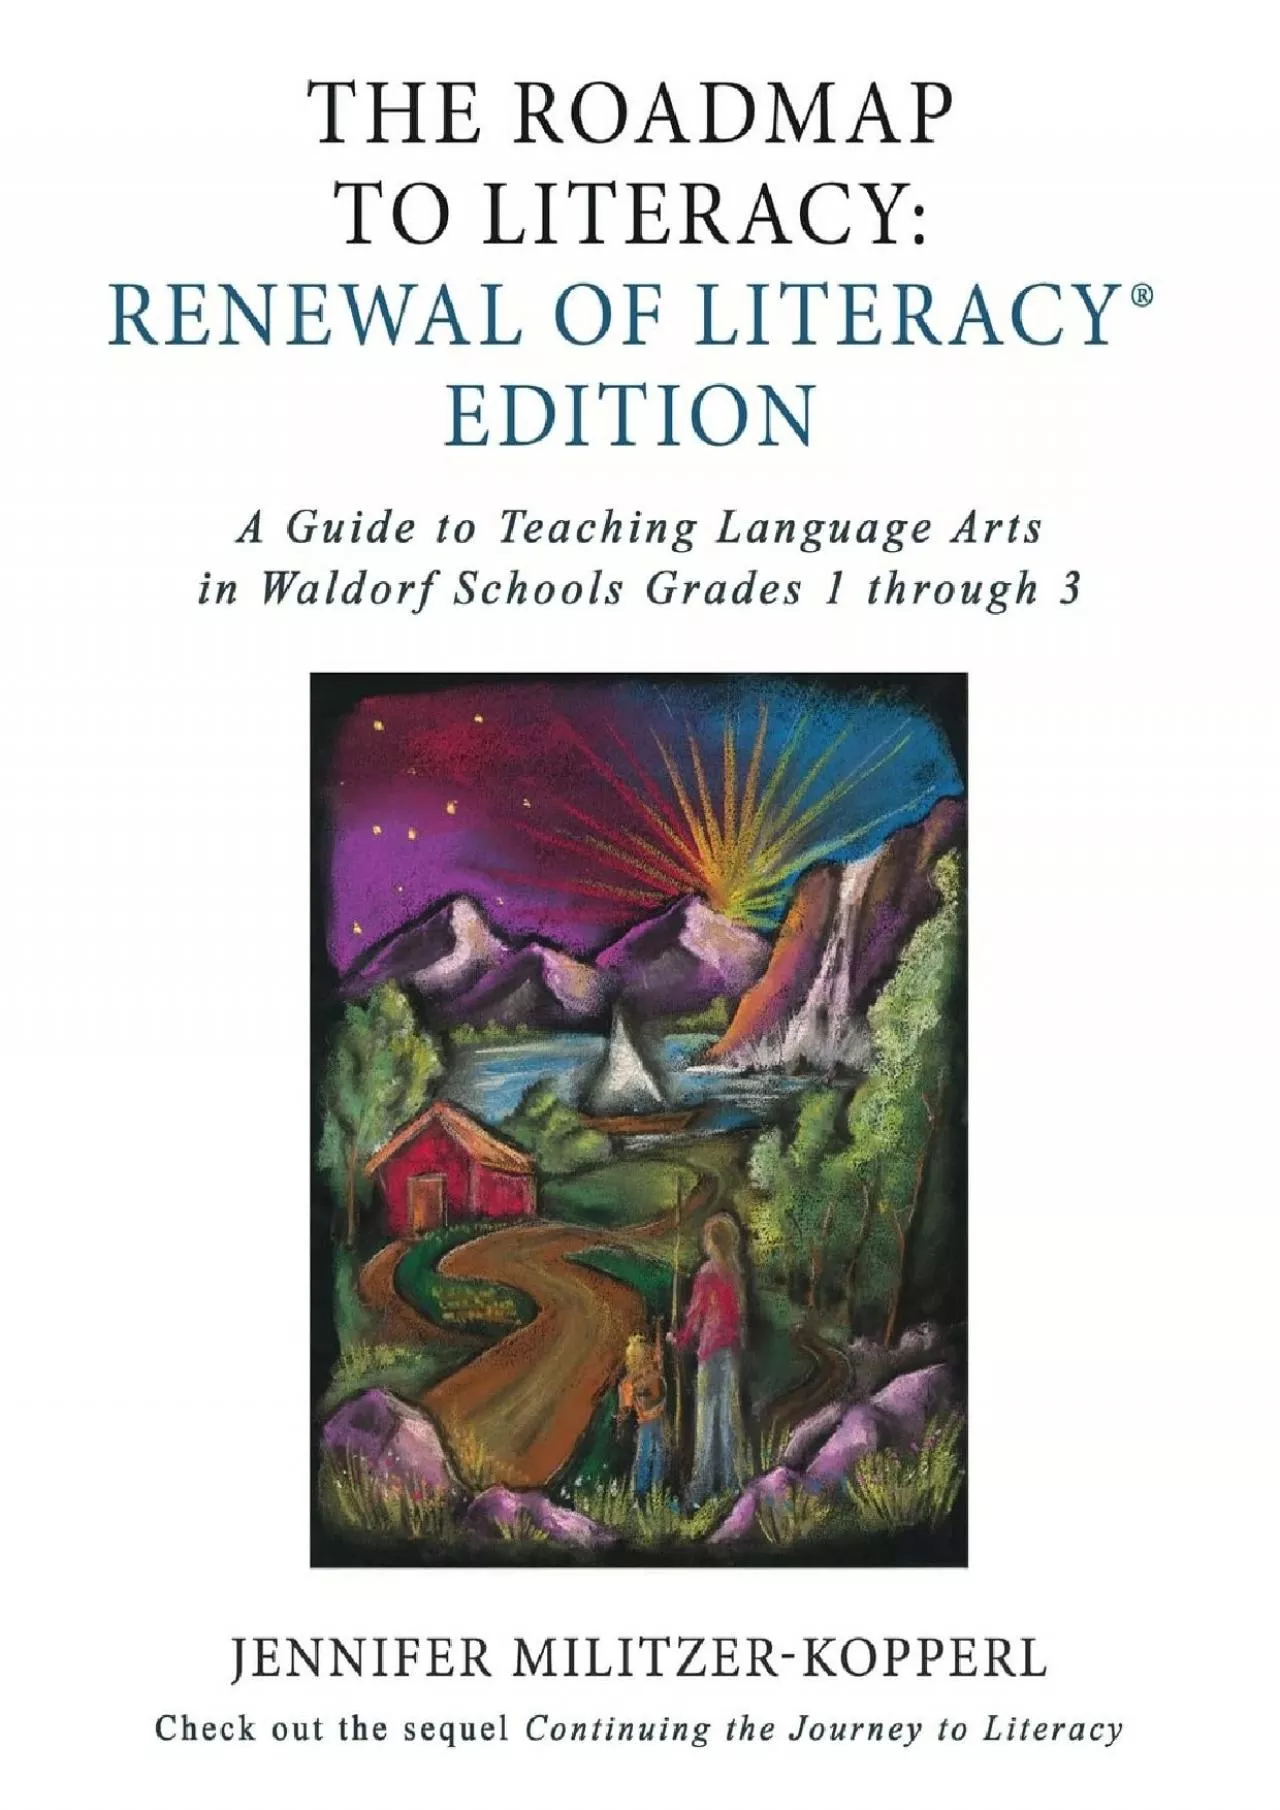 [DOWNLOAD] The Roadmap to Literacy Renewal of Literacy Edition: A Guide to Teaching Language